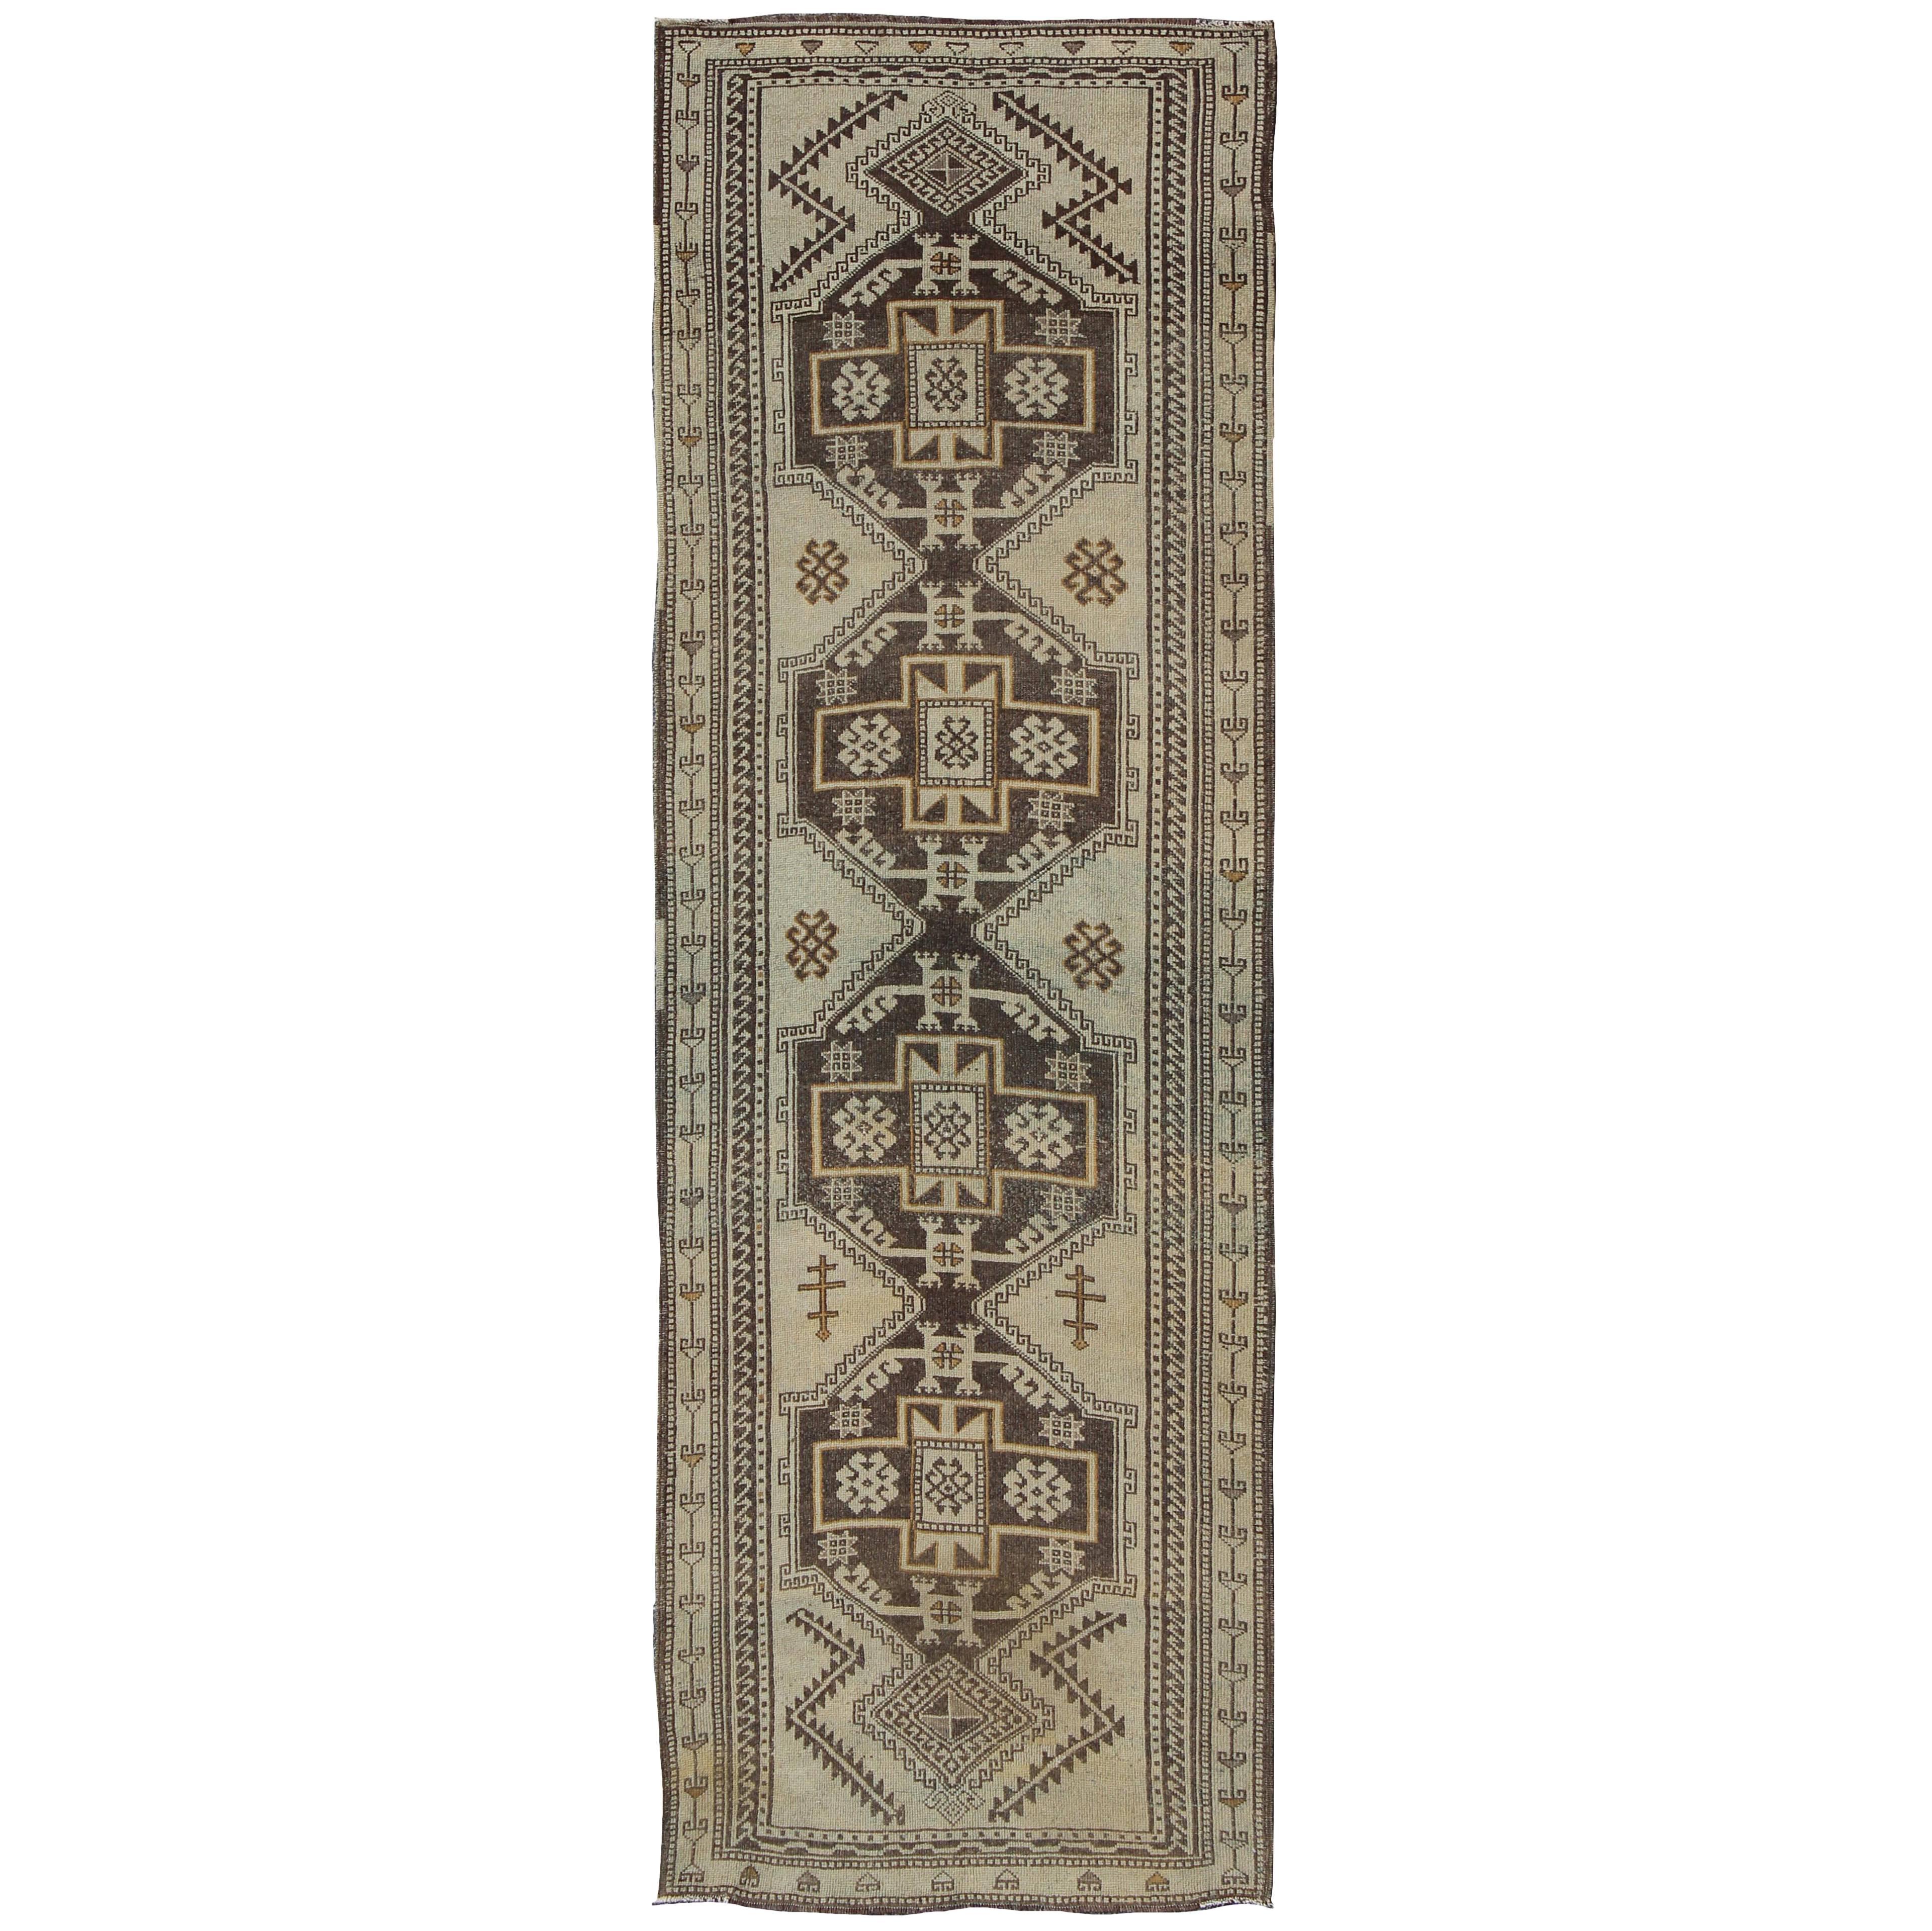 Vintage Oushak Runner with Tribal Medallions and Motifs in Brown and Taupe